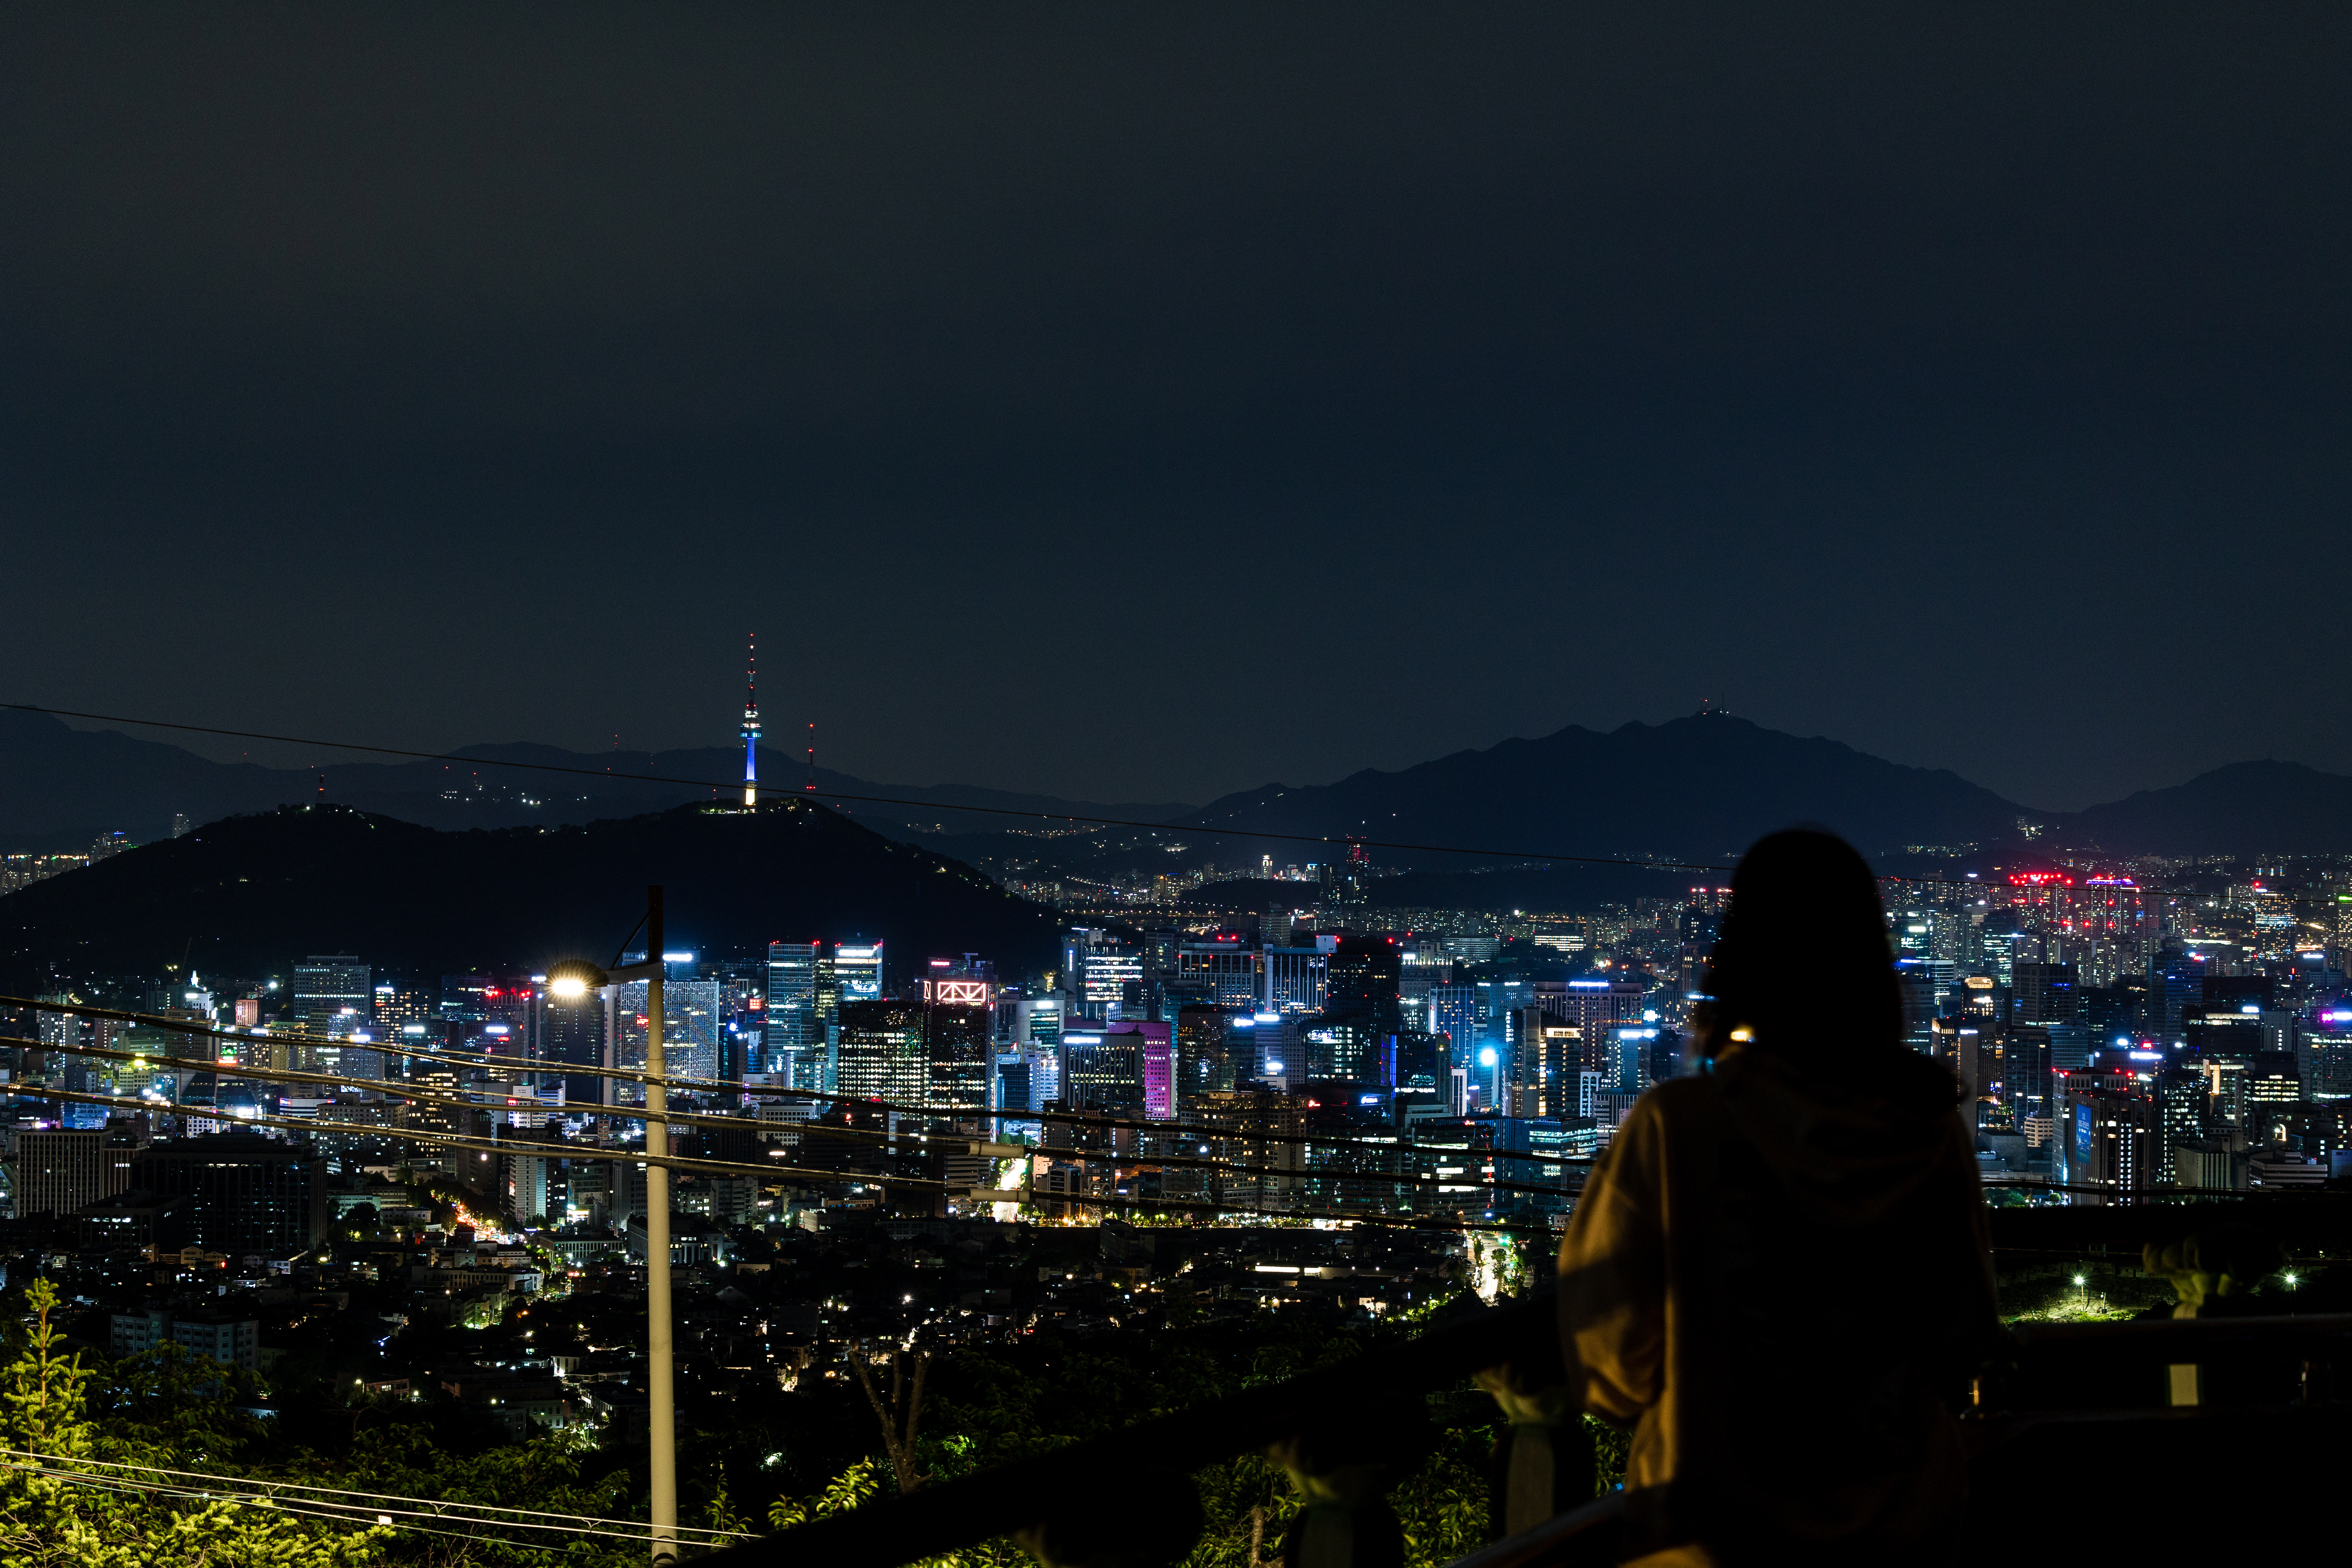 Bugaksan Mountain: Amazing Vibes from Coffee Shops with a View to the Nightscape of Downtown Seoul